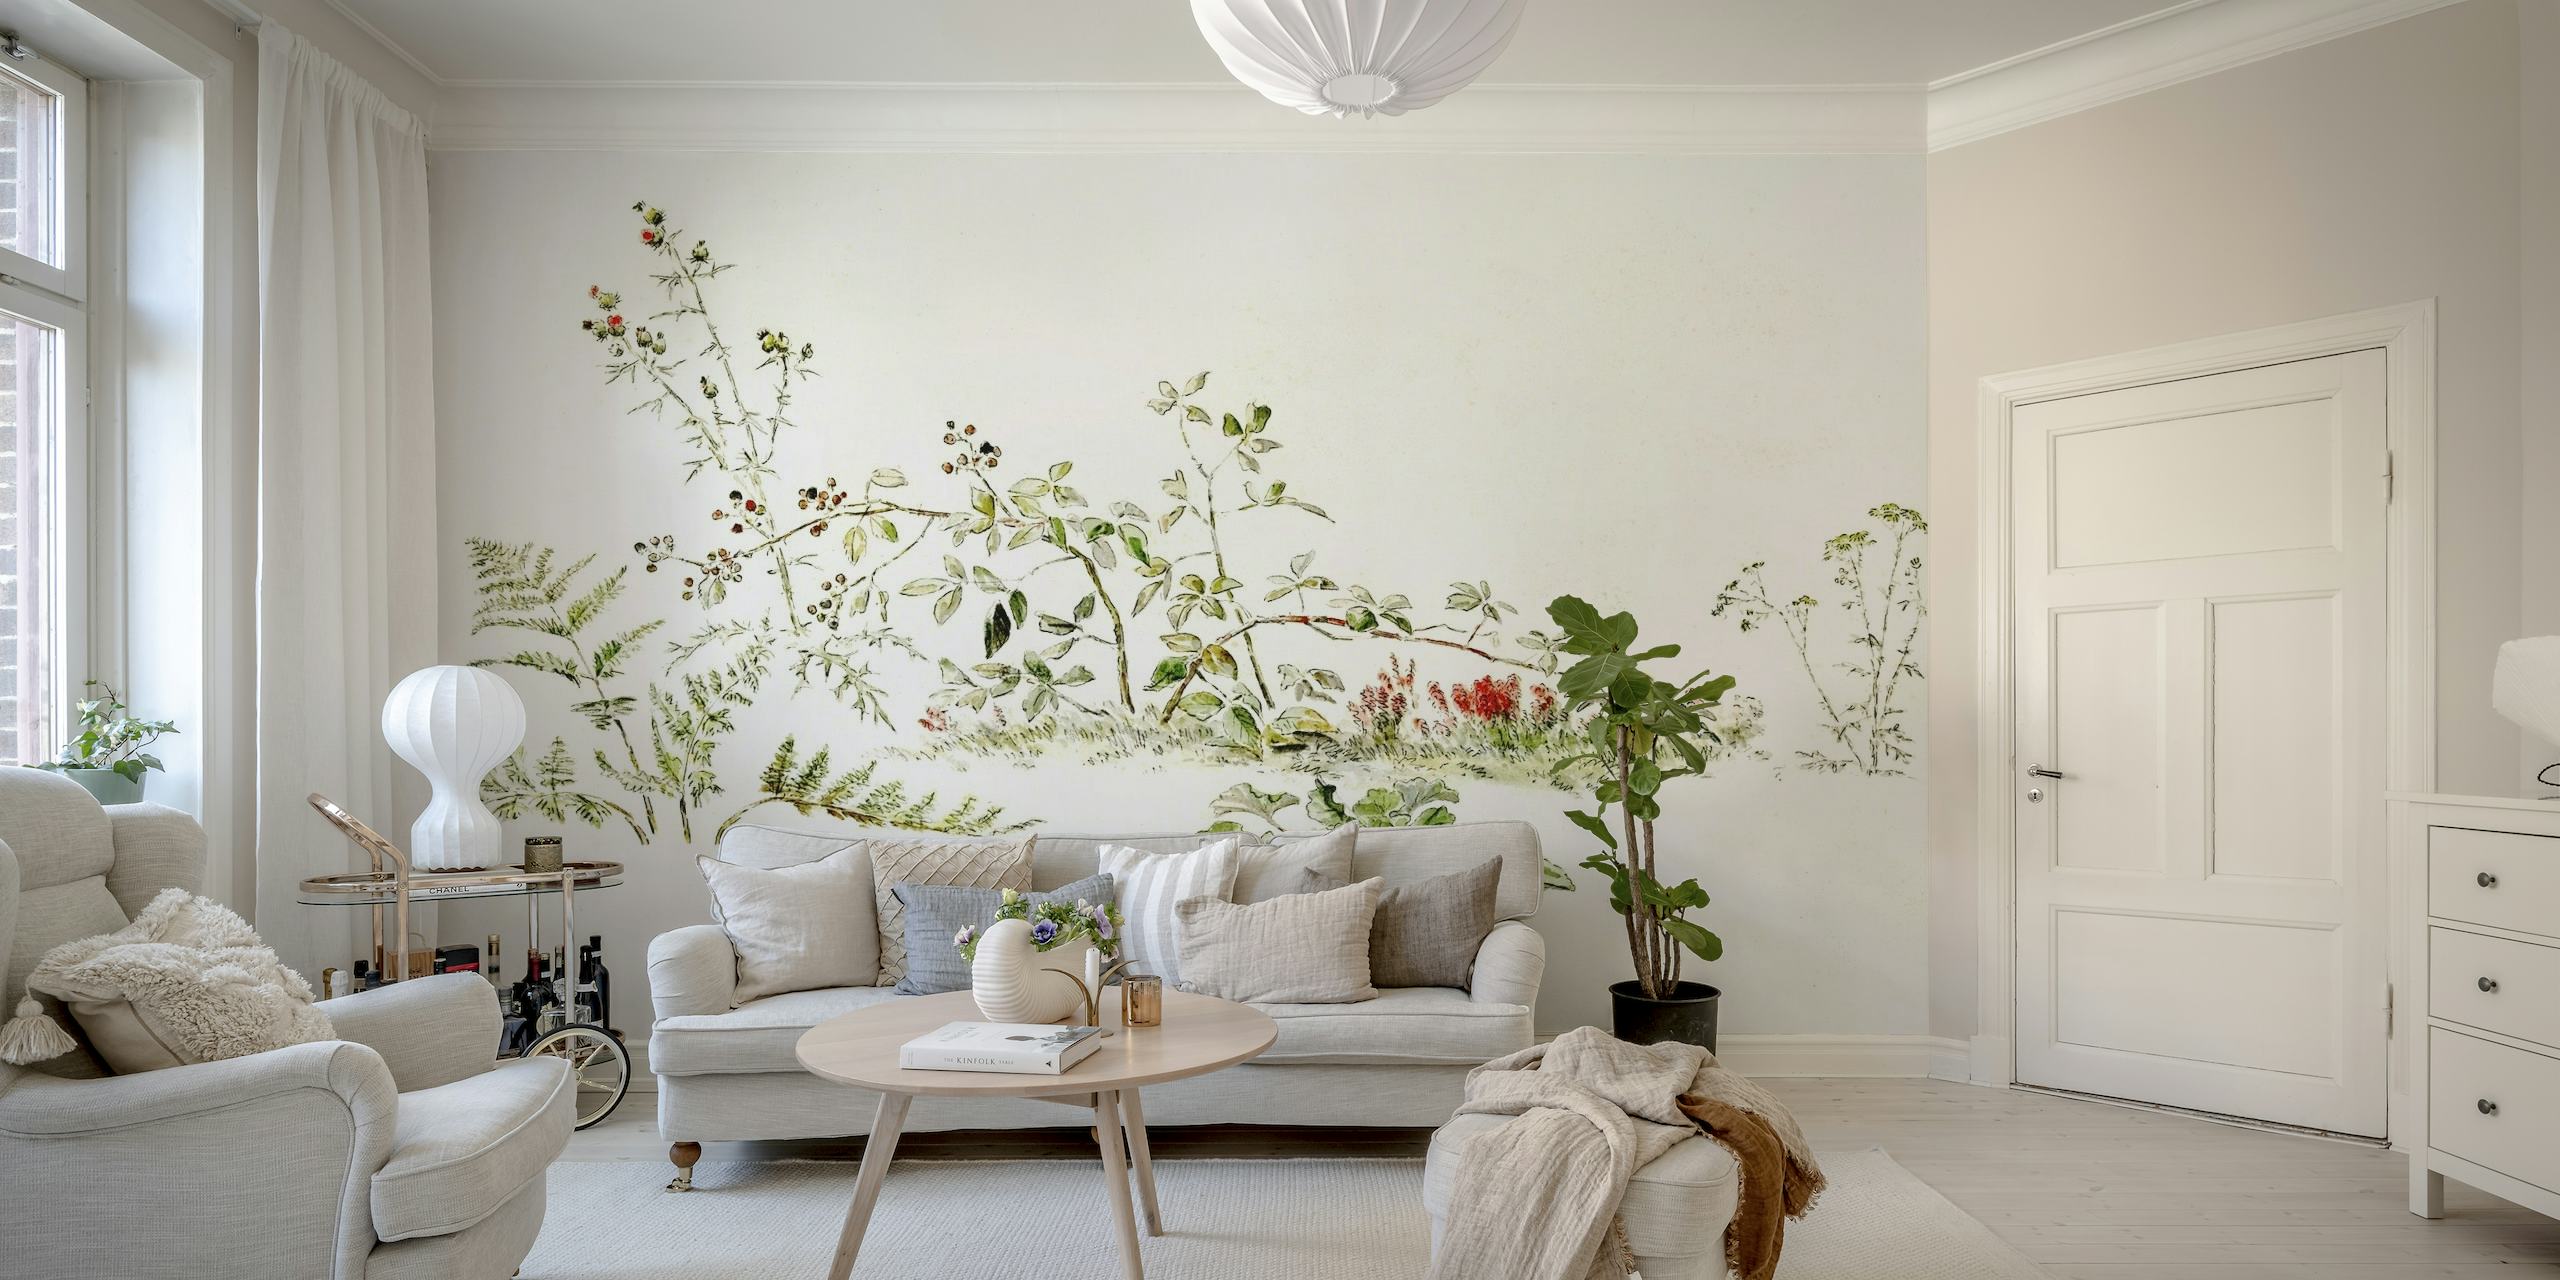 Hand-drawn botanical illustrations wall mural with soft green and subtle red accents on a clean background.